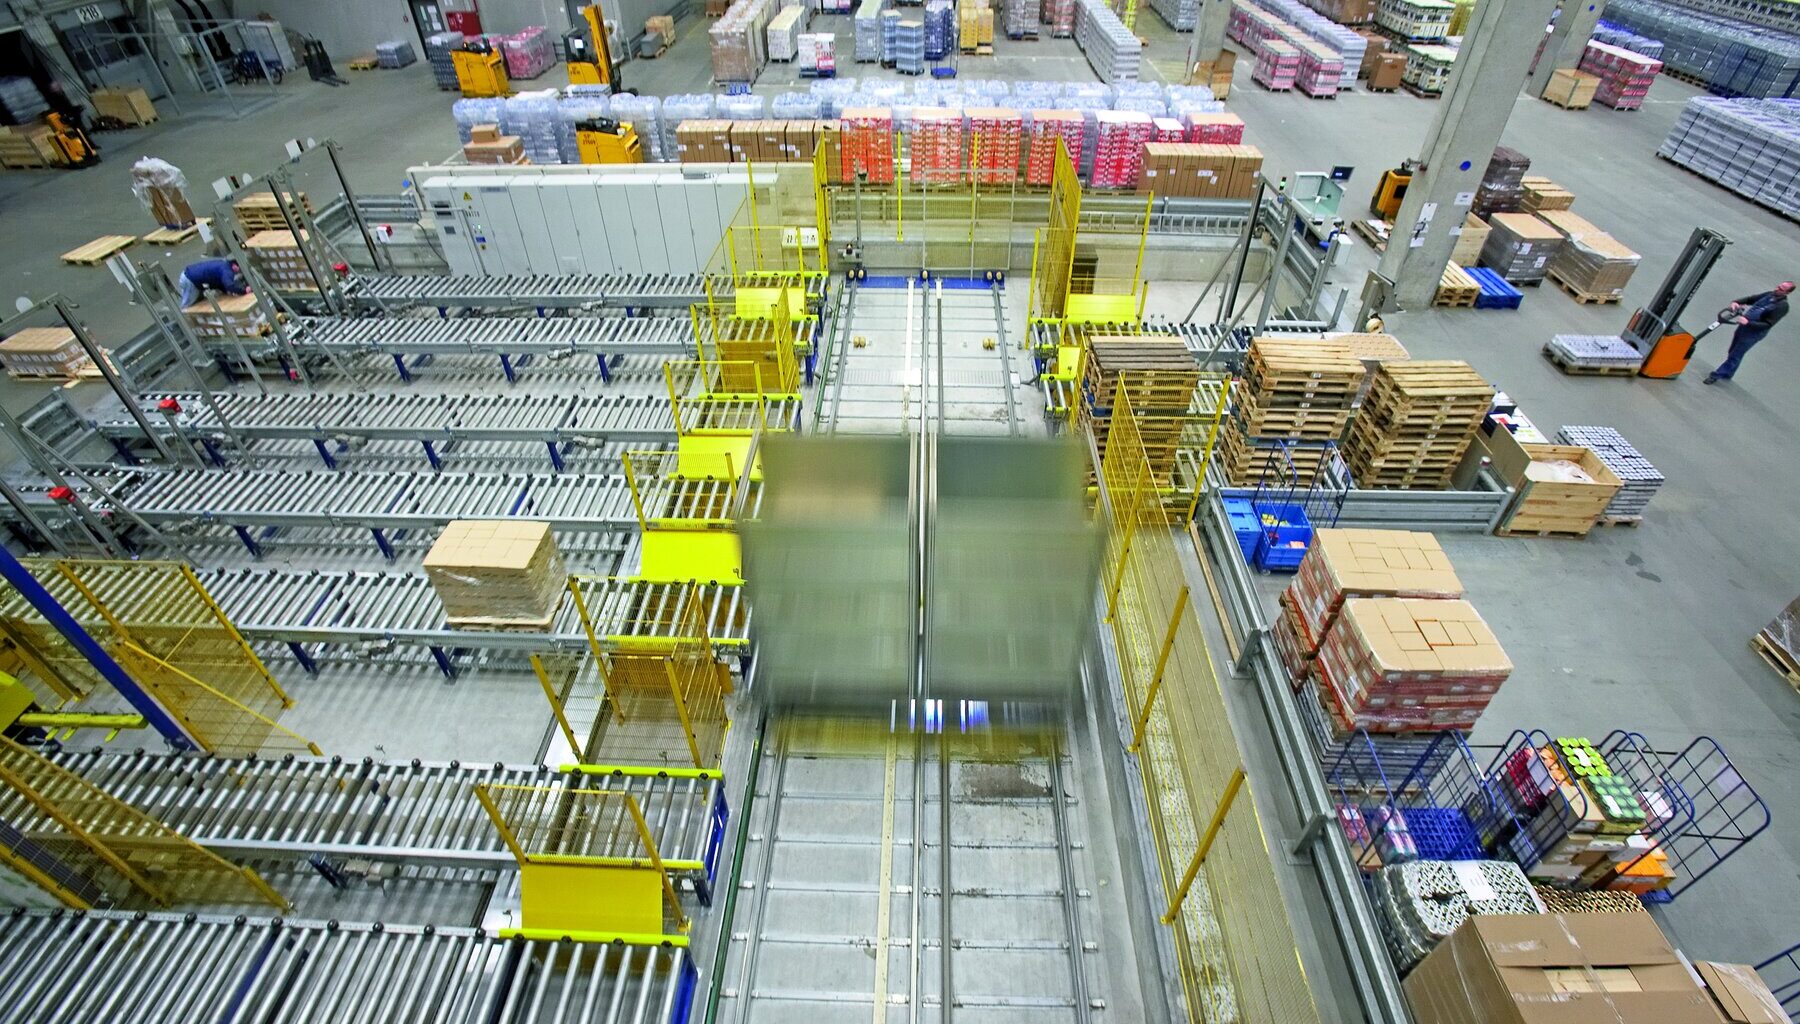 packaging and pallet handling, Five Applications for Intelligent Sensors in the Retail Industry – Part 5